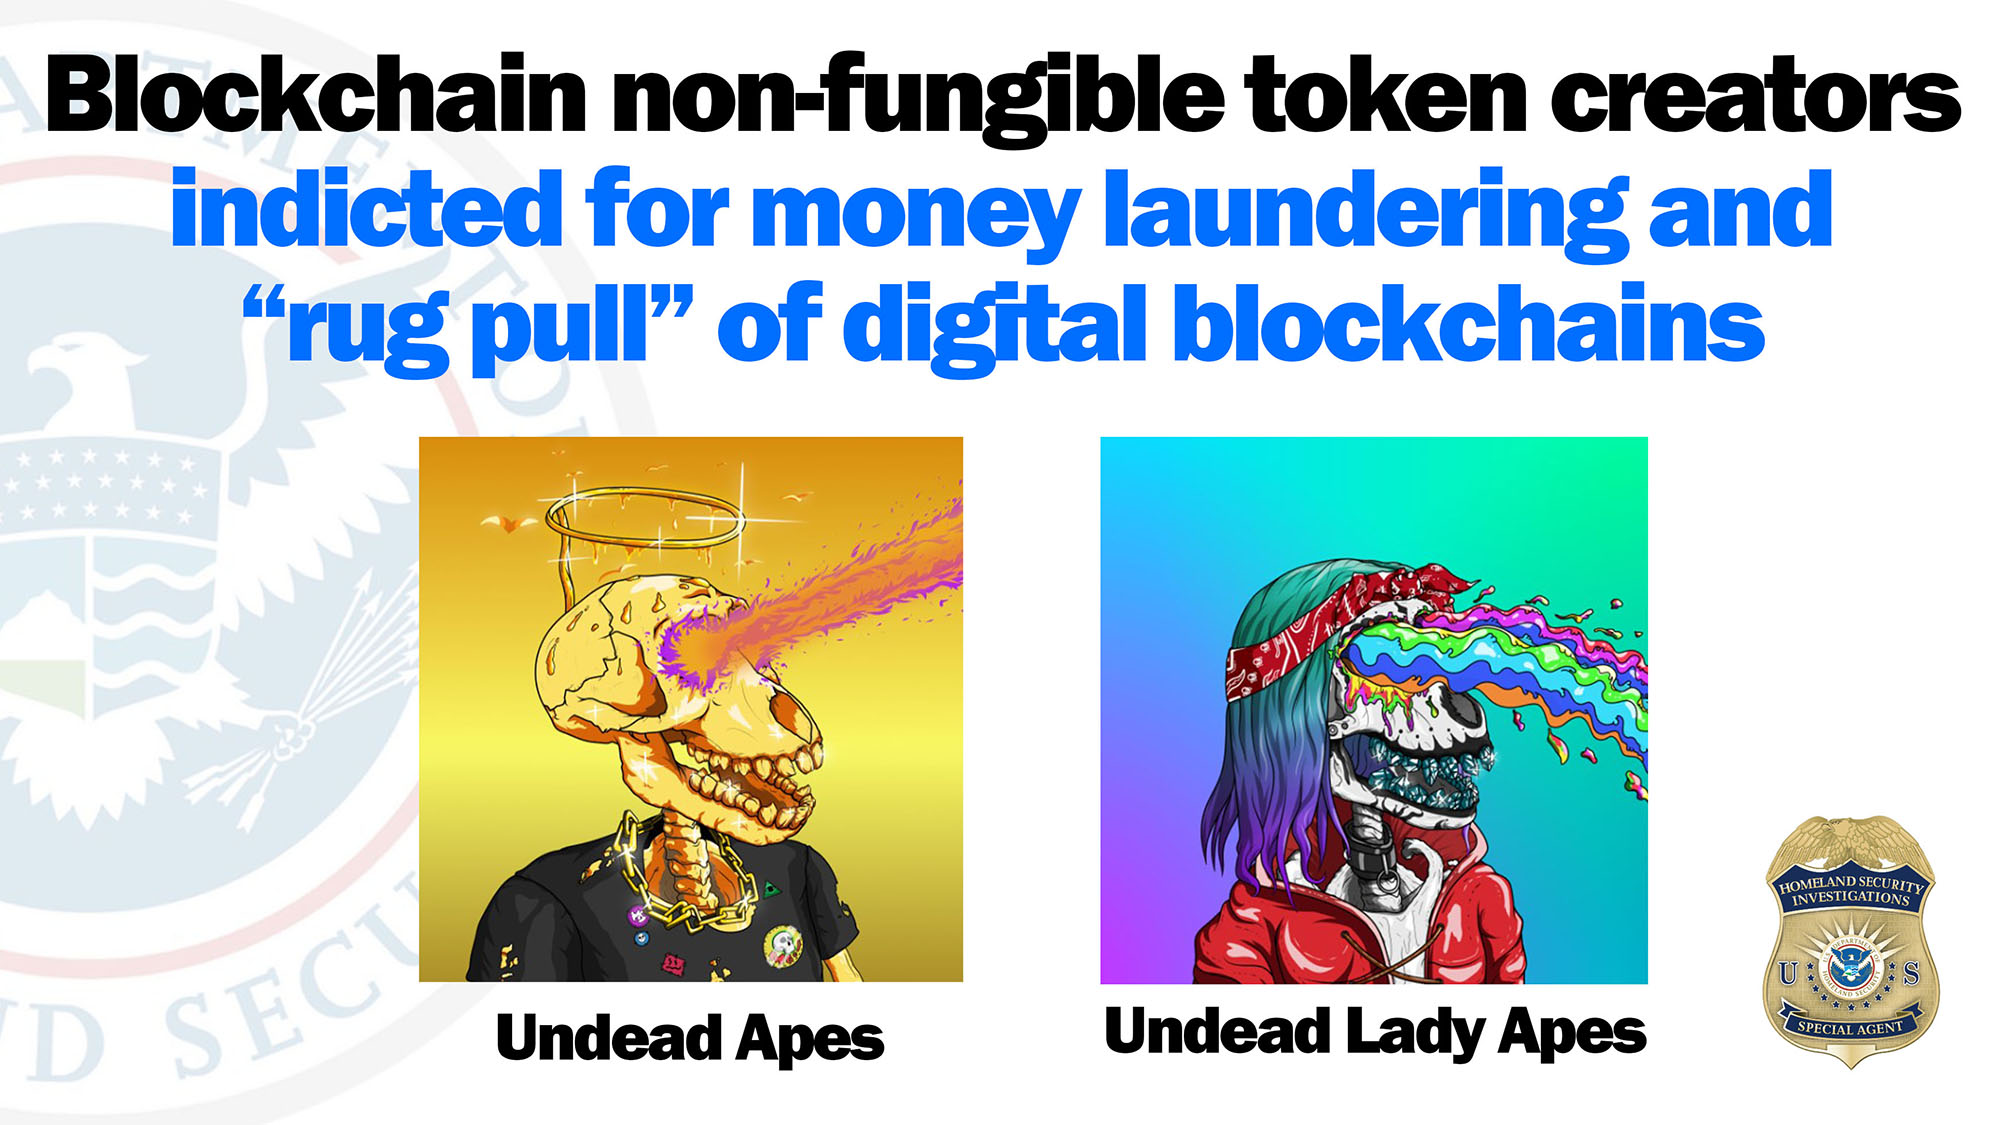 2 charged with NFT money laundering, ‘rug pull’ of digital blockchains